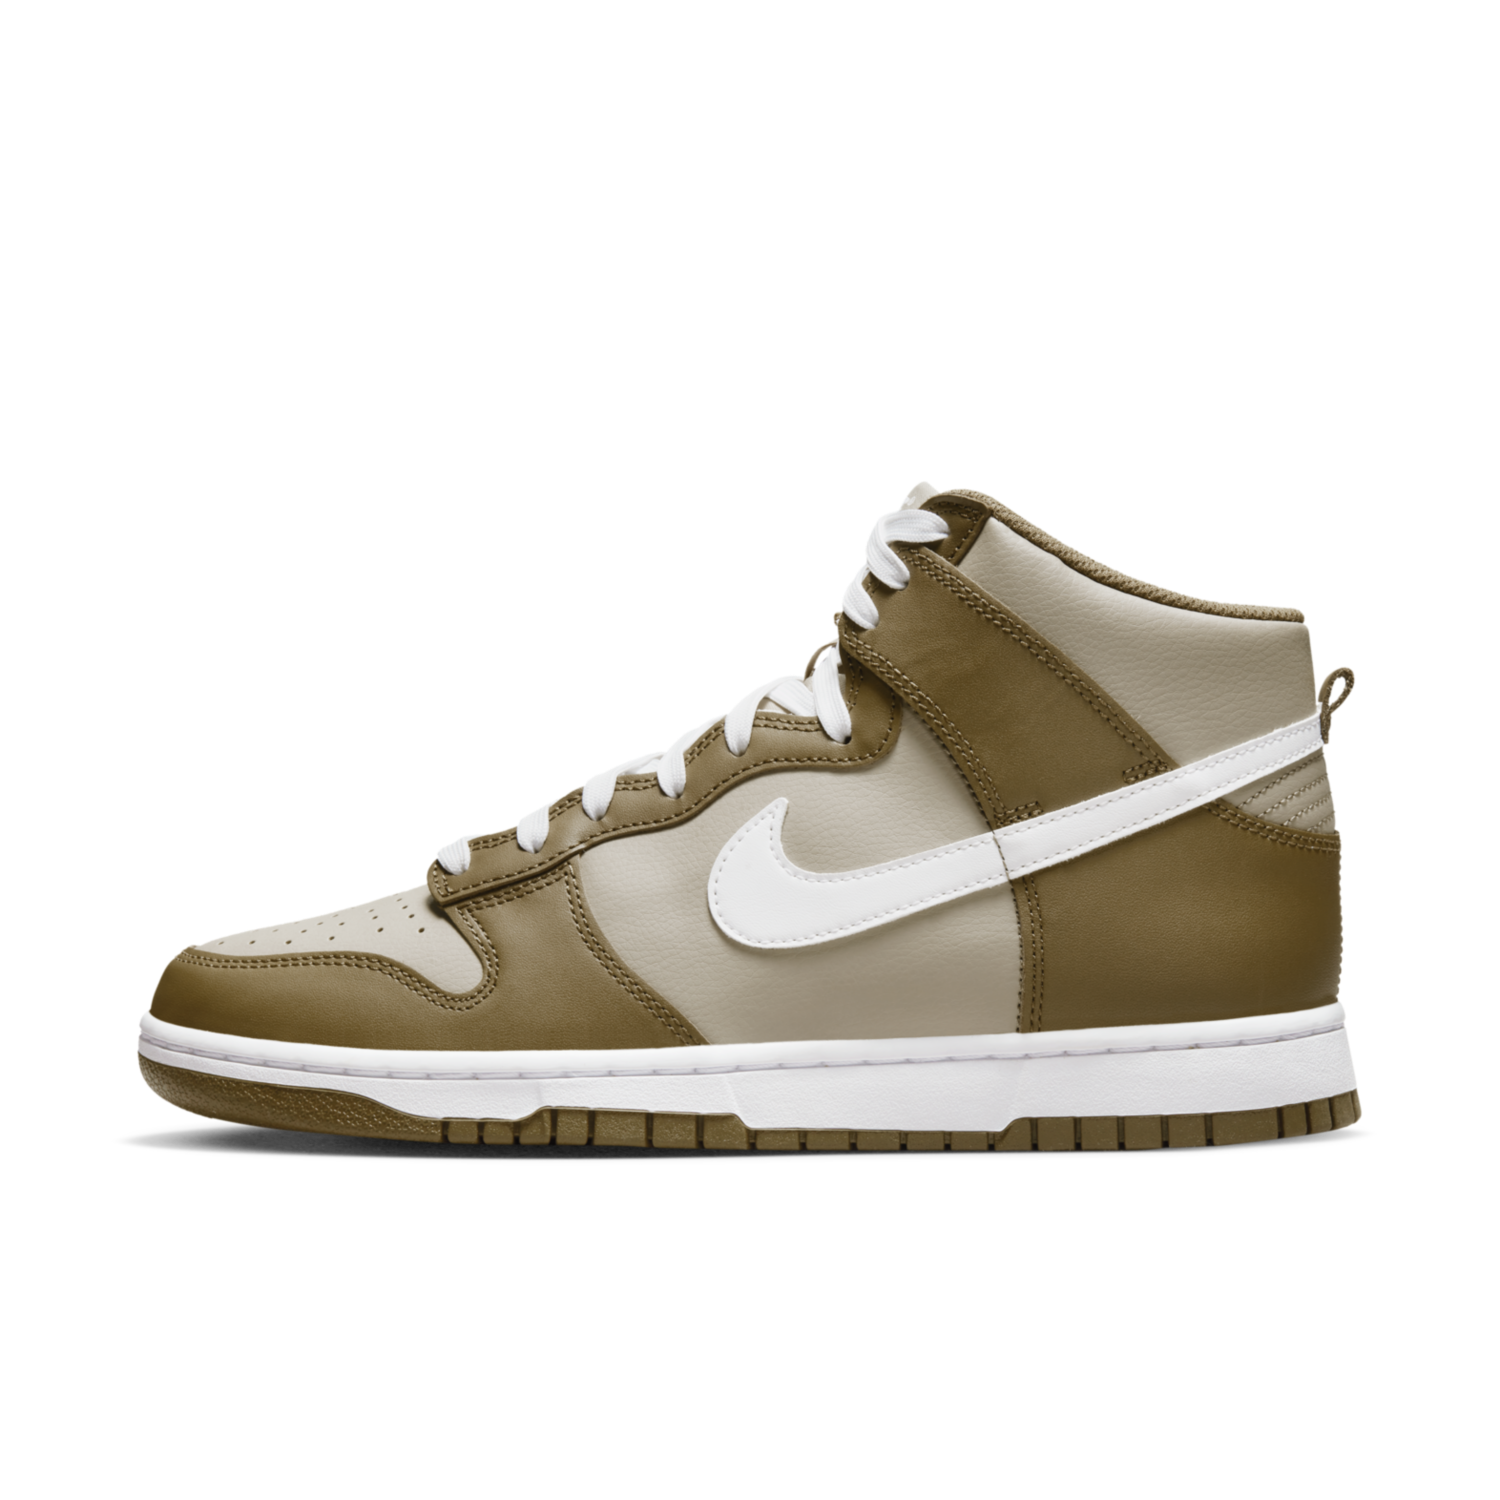 Nike Dunk High Retro 'Mocha' Most Wanted Sneaker Releases